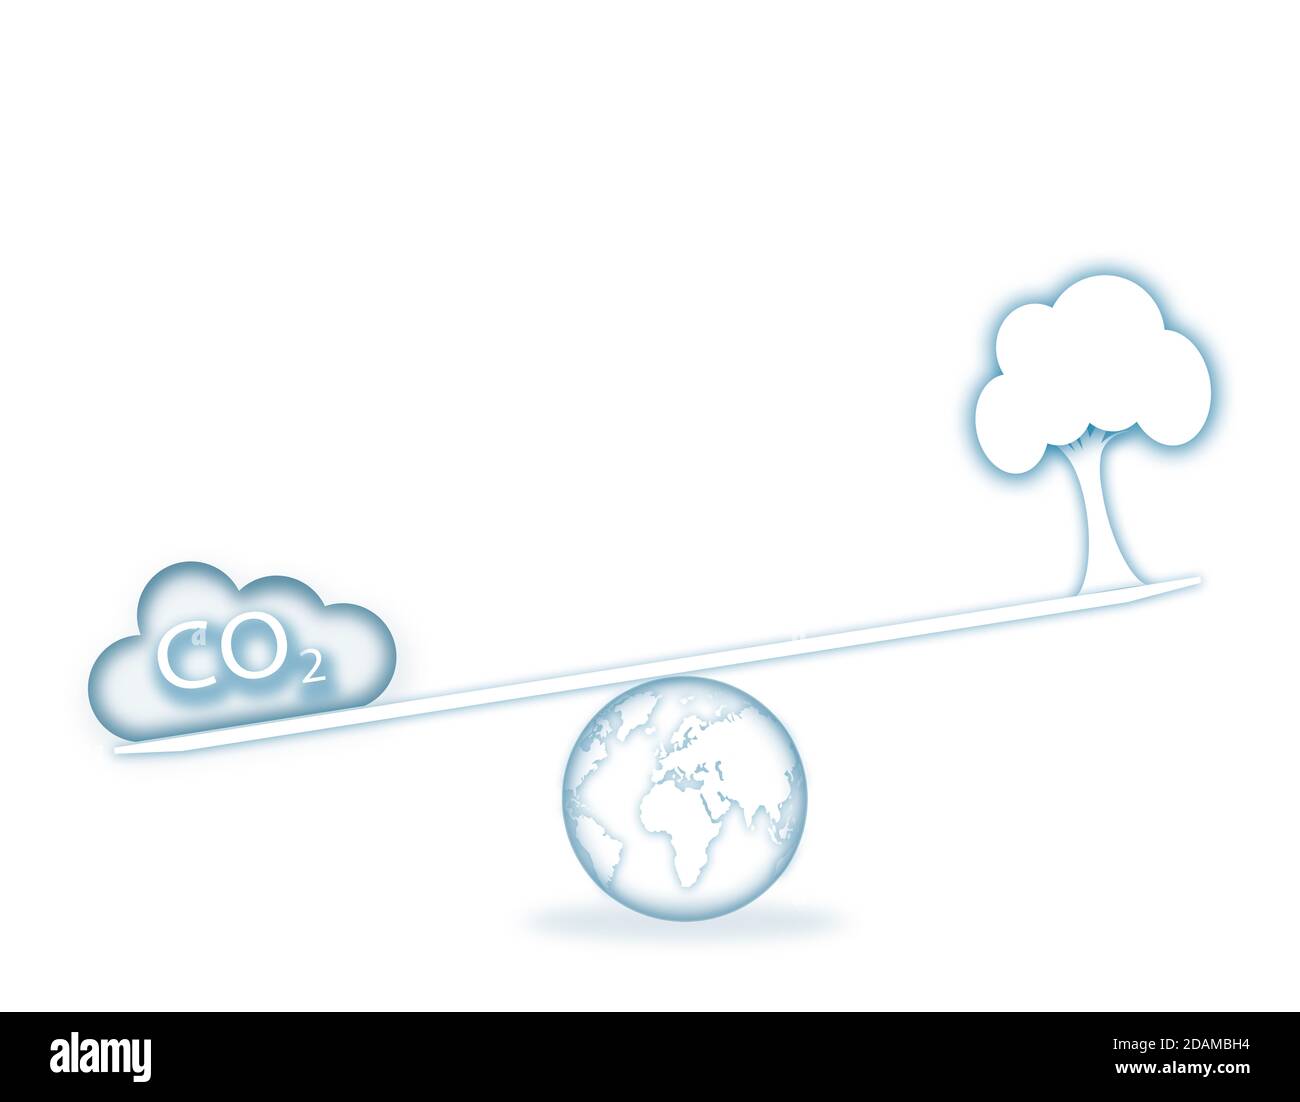 Scales on Earth with carbon cloud and tree, illustration. Stock Photo